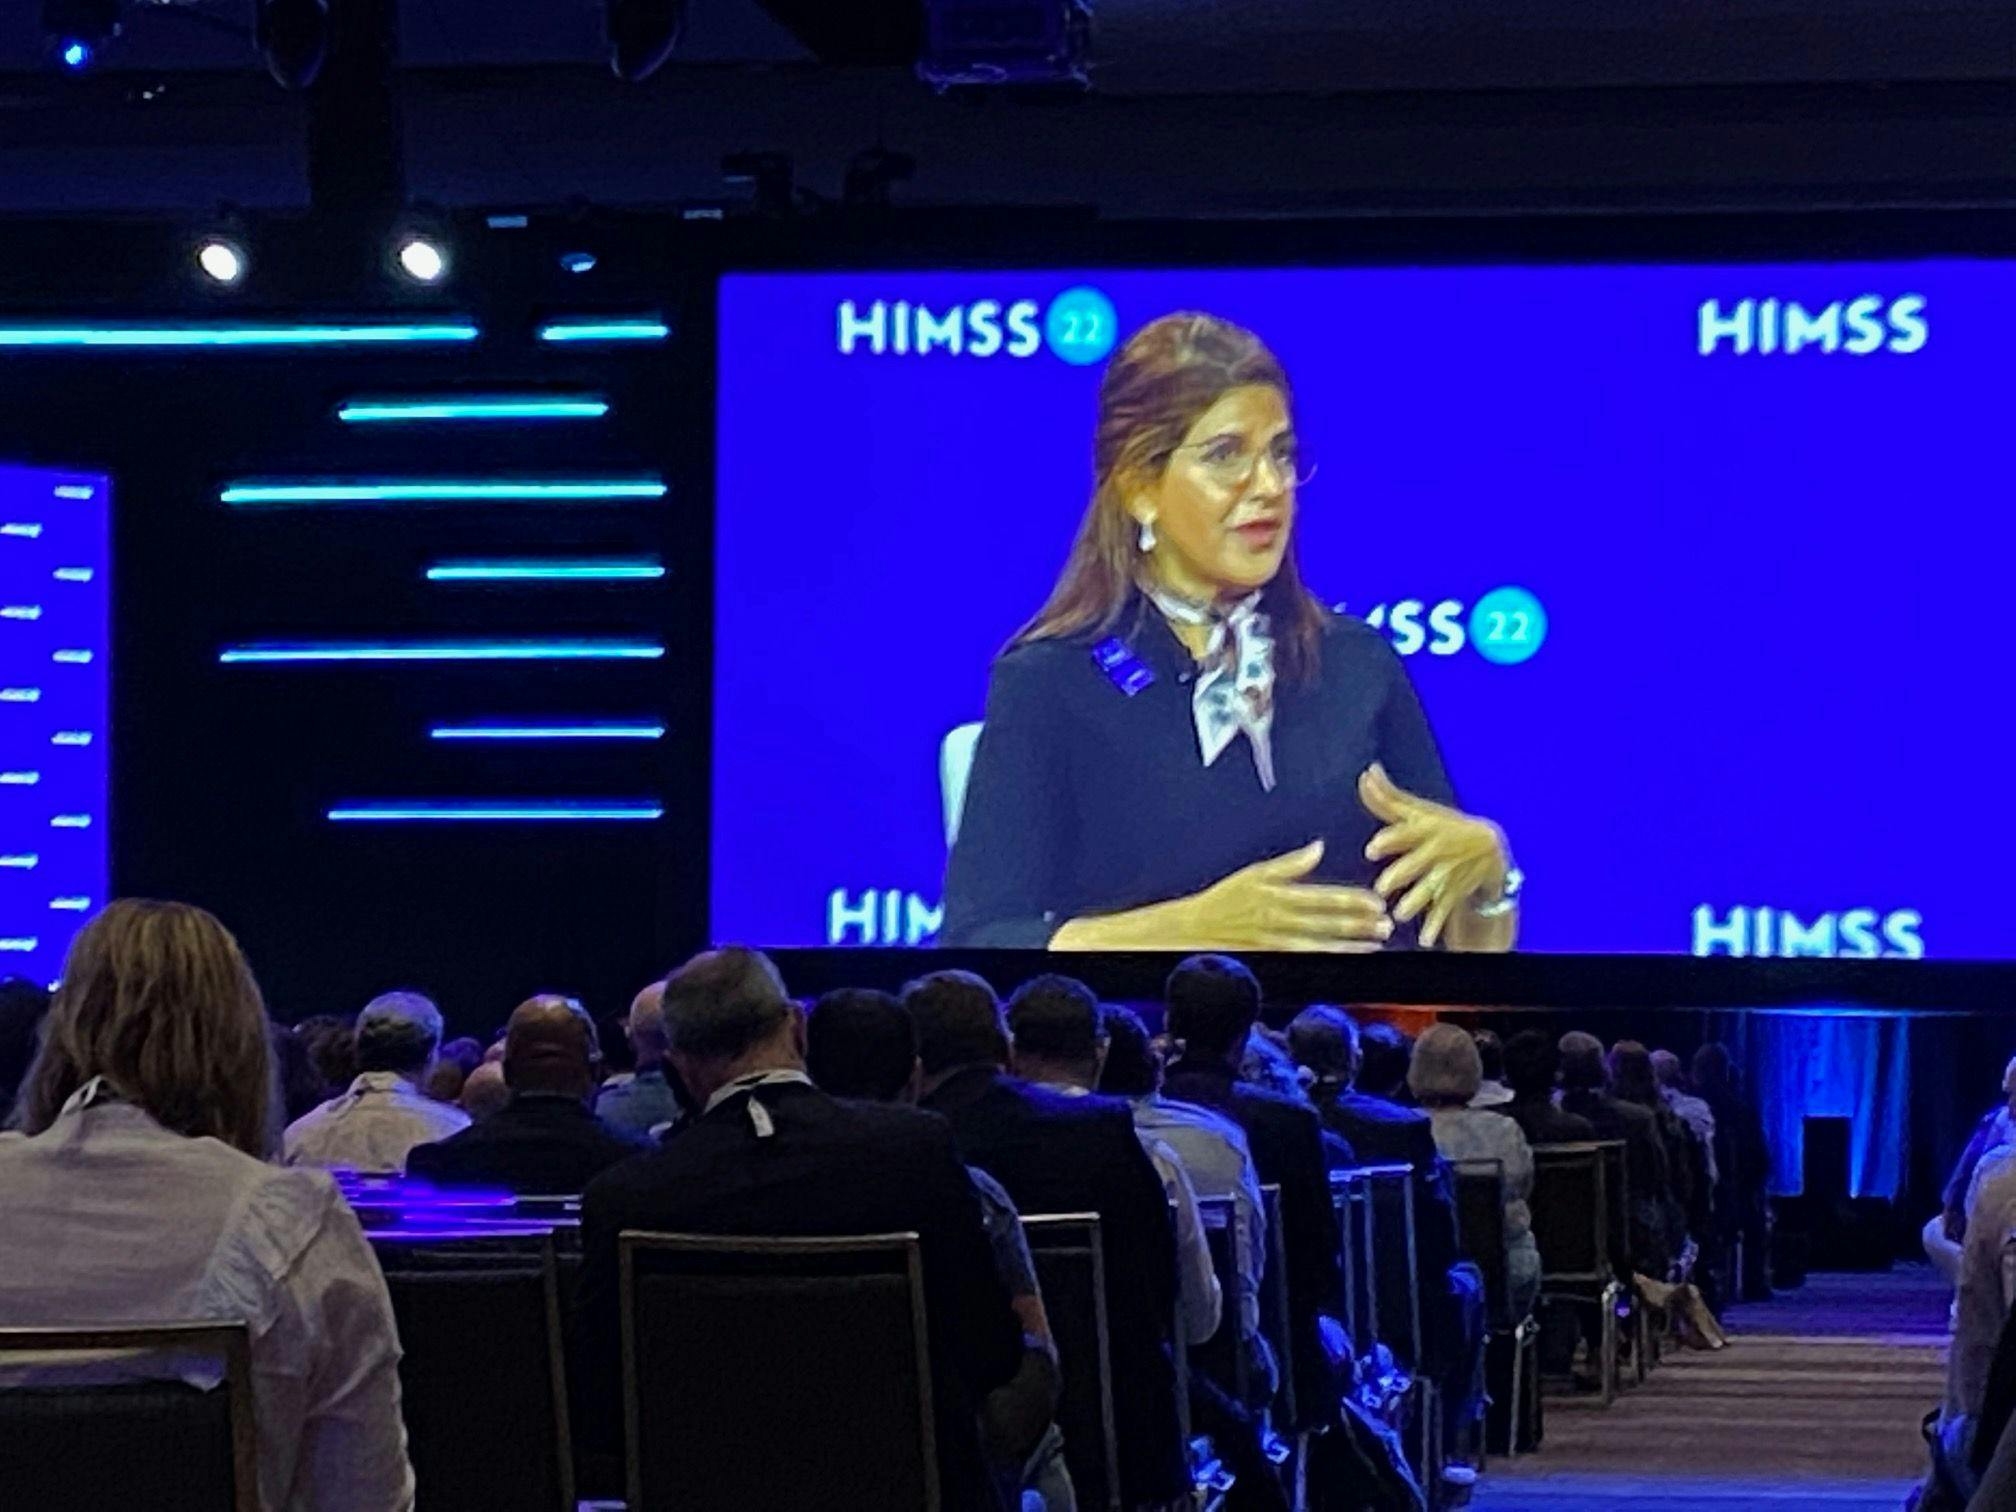 Tamara Sunbul, medical director of clinical informatics at Johns Hopkins Aramco Healthcare, speaks at the HIMSS 2022 Conference Wednesday.